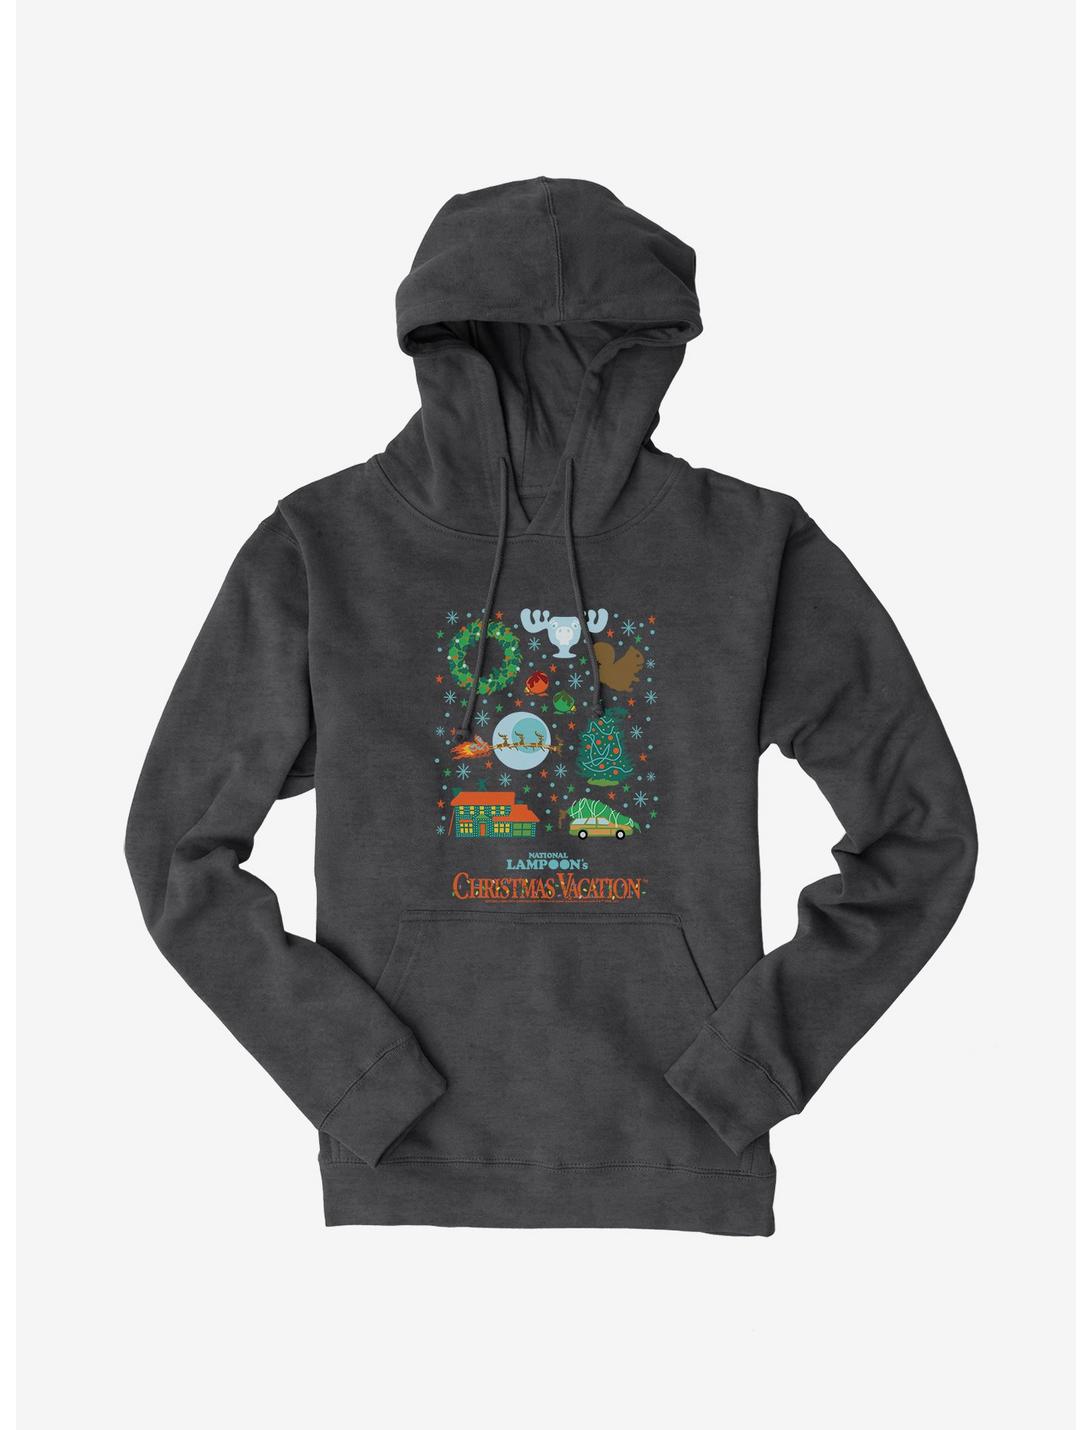 Christmas Vacation Icons Hoodie, CHARCOAL HEATHER, hi-res